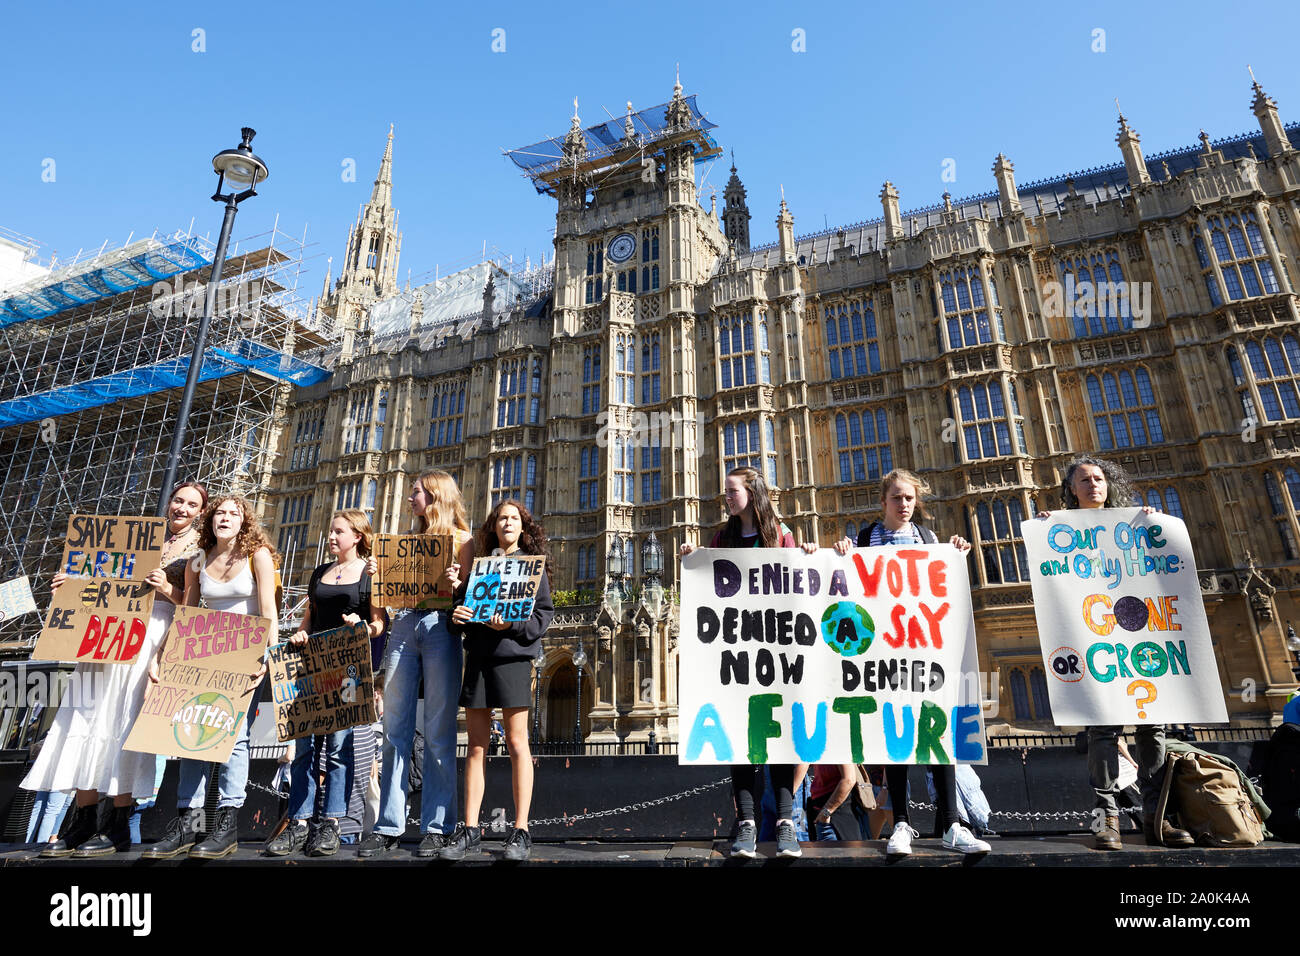 London, U.K. - Sept 20, 2019: Protestors in Westminster as part of the Youth Strike 4 Climate worldwide demonstration. Stock Photo